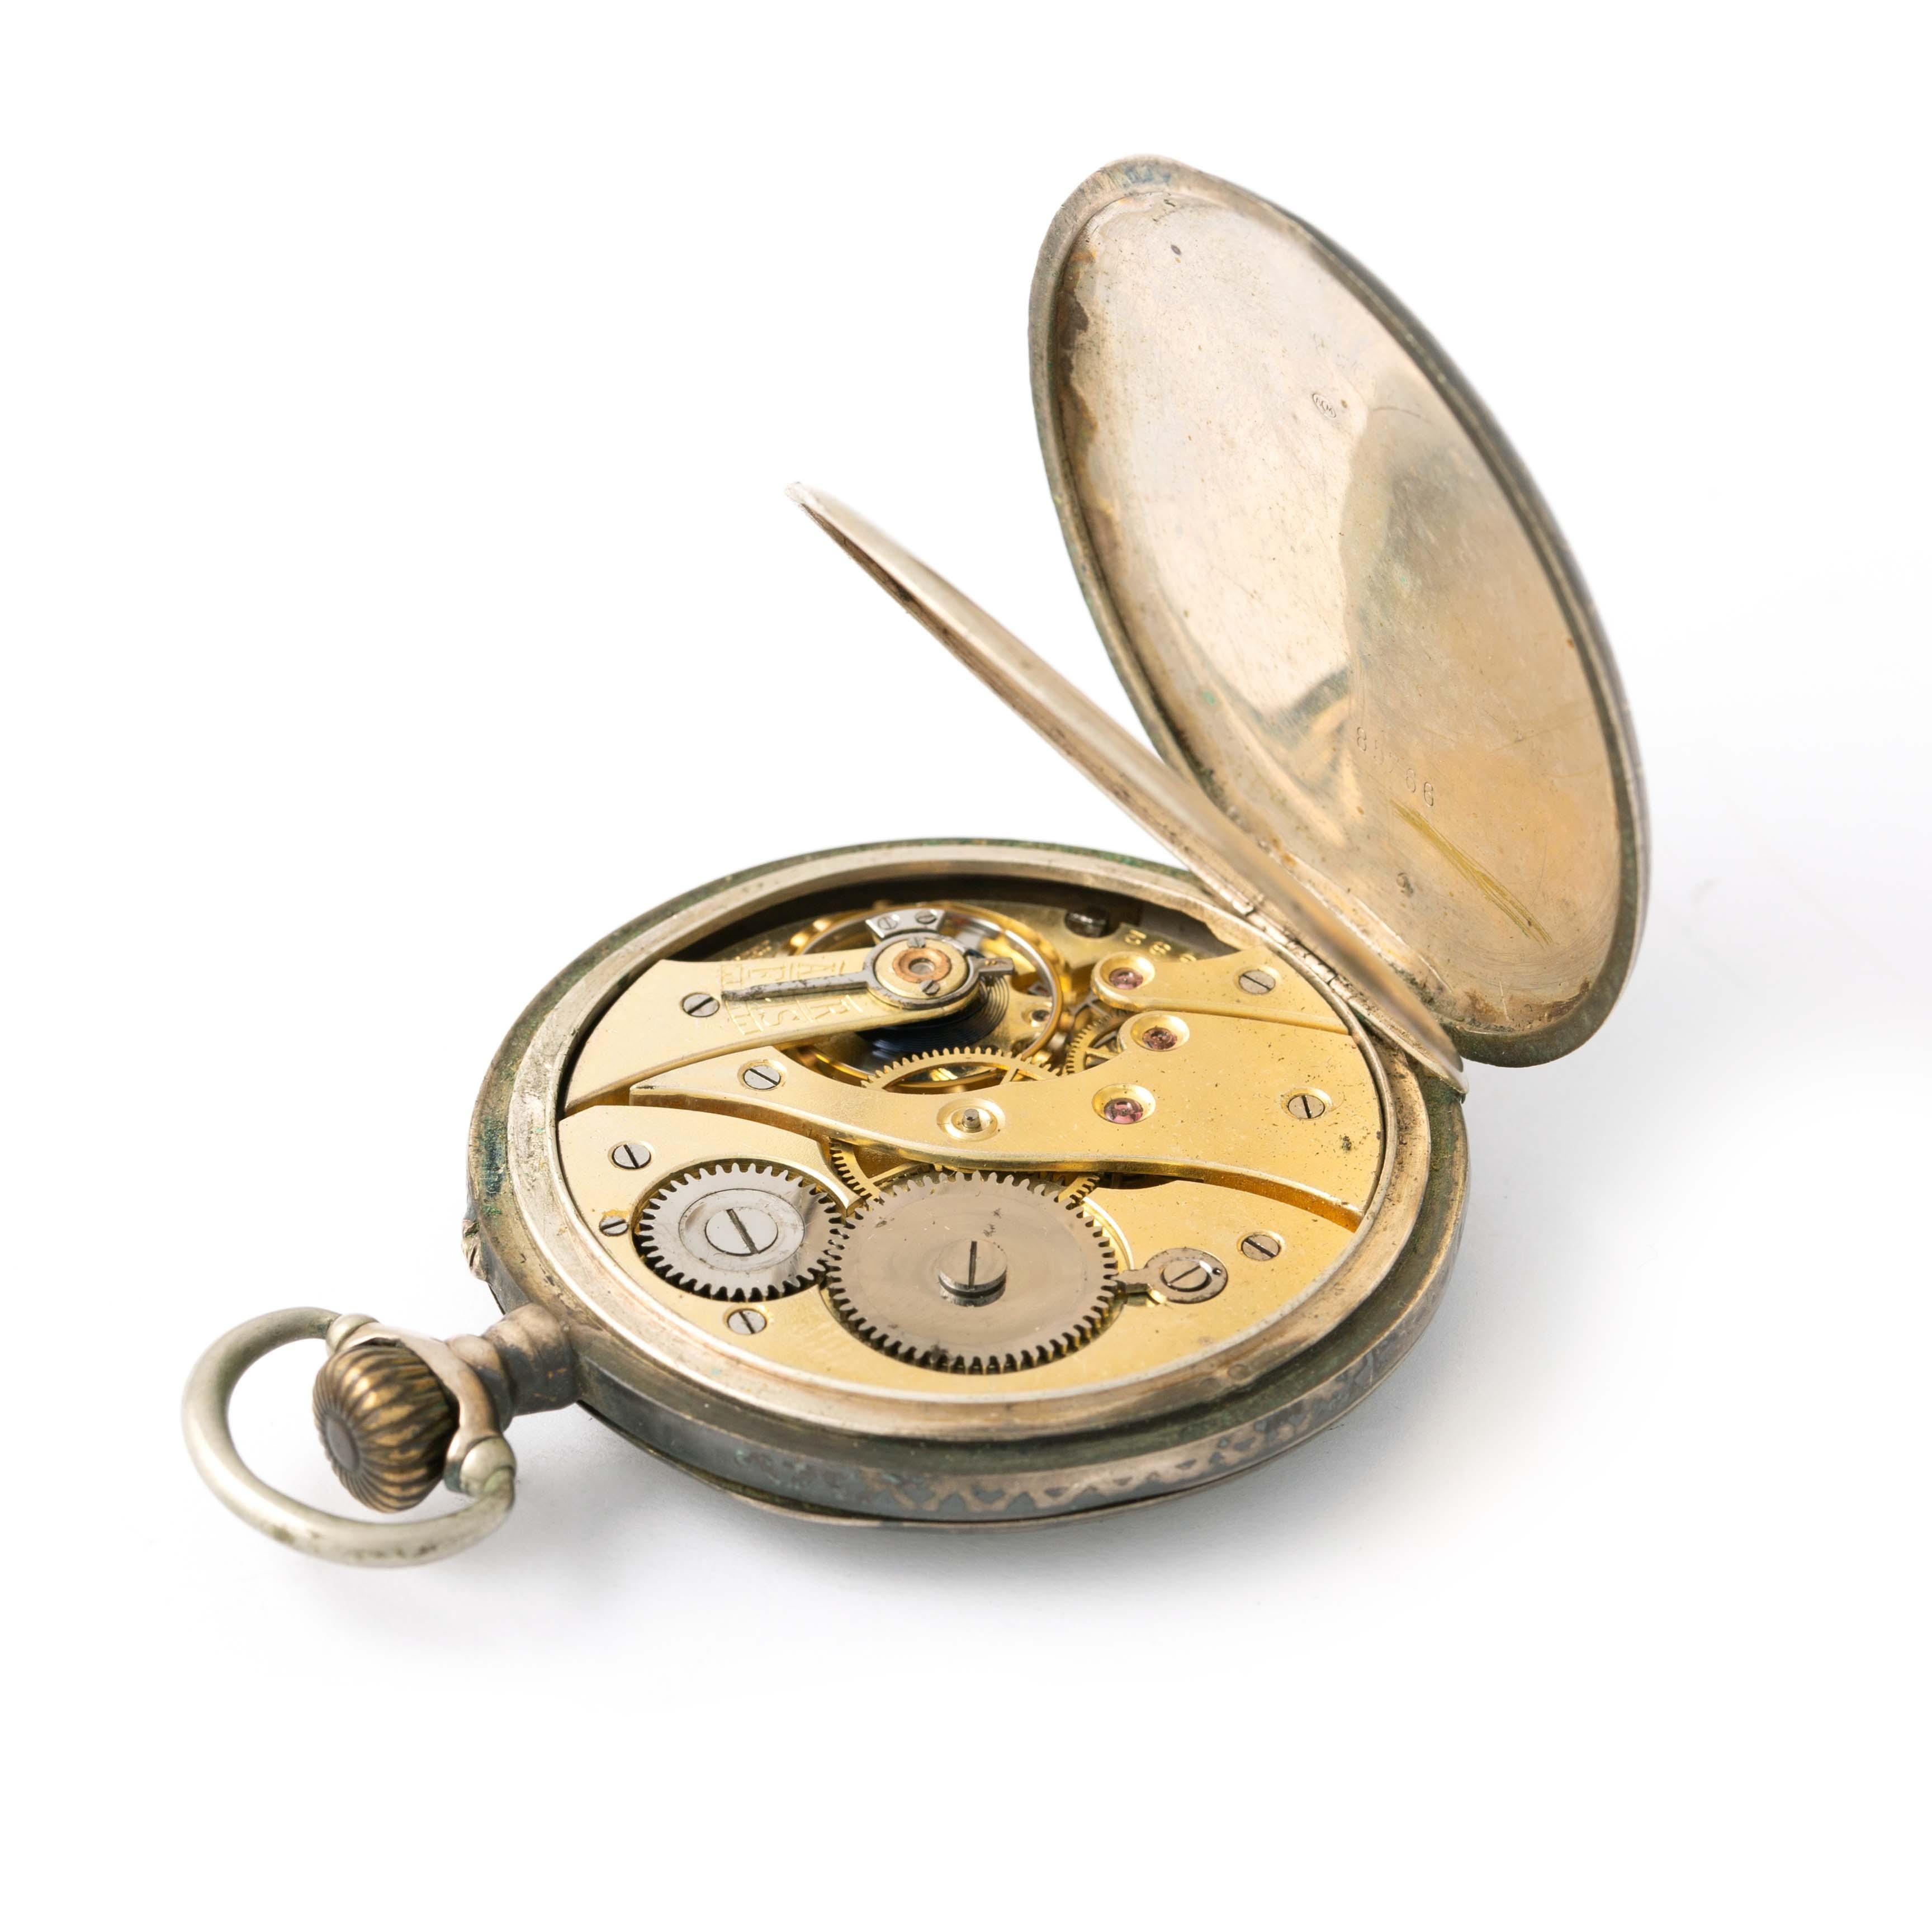 Silver pocket watch.
Height: 7.00 centimeters. 
Gross weight: 83.44 grams.

We do not guarantee the functioning of this watch.